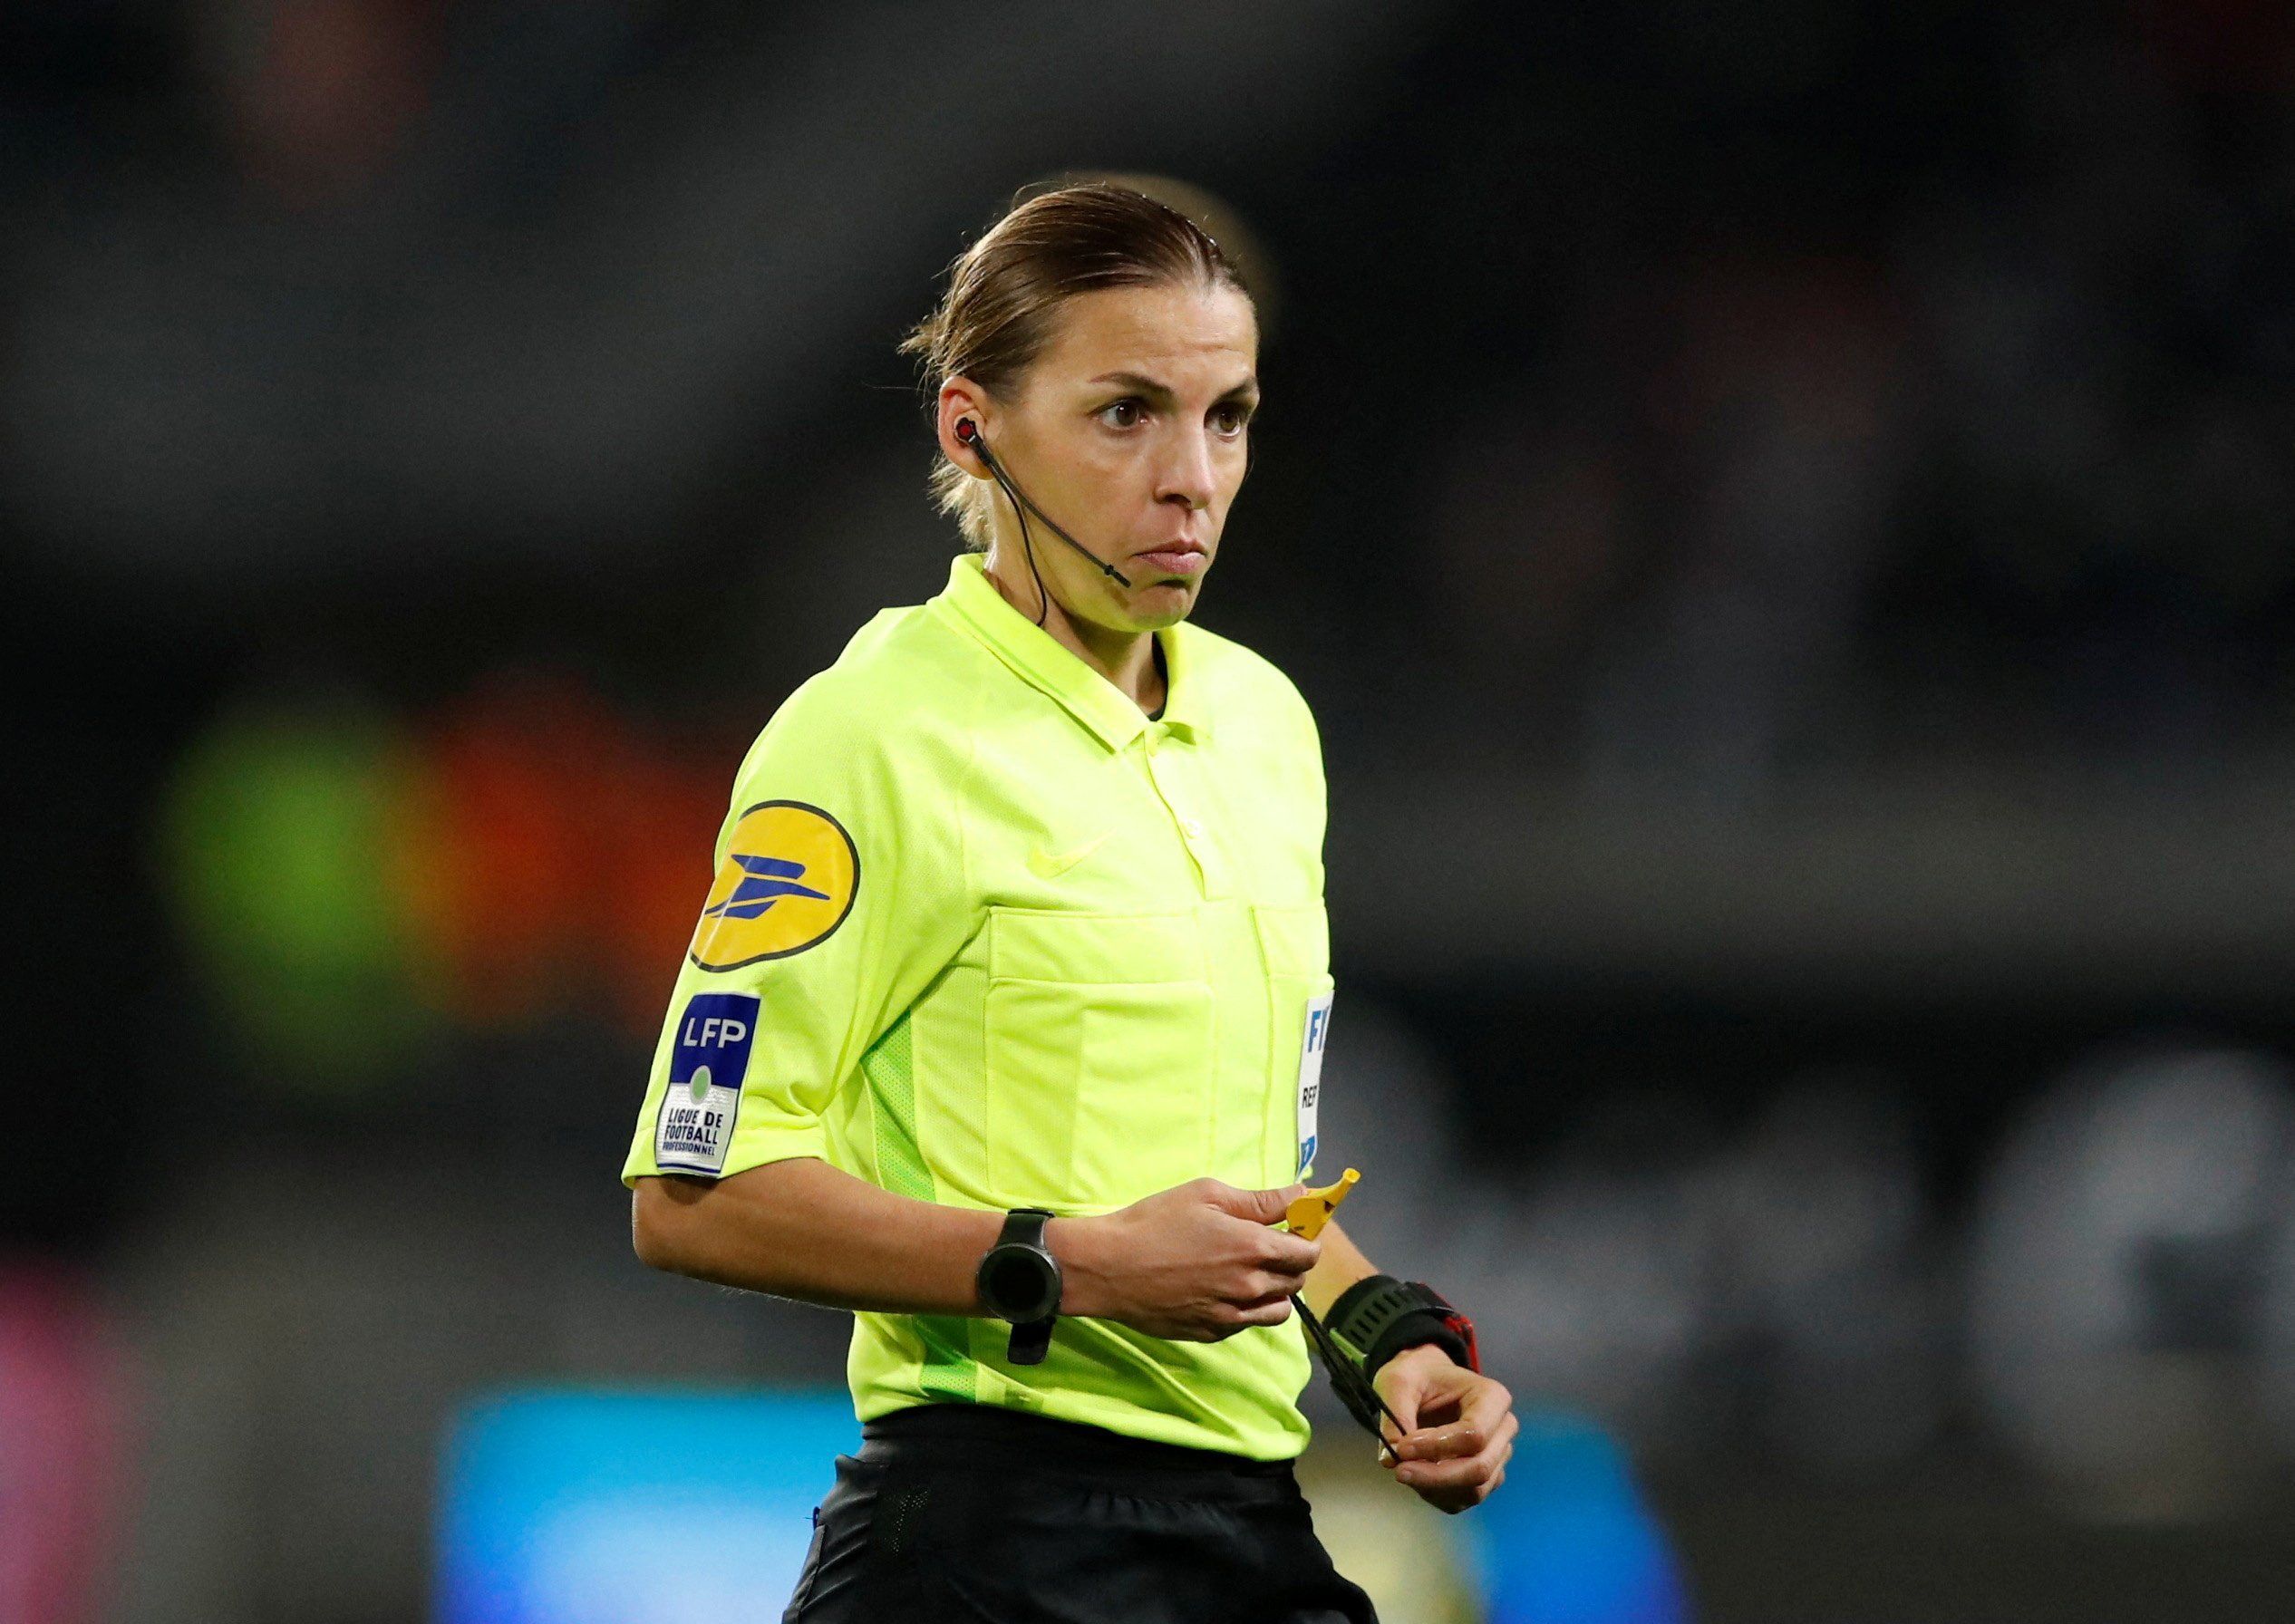 Qatar 2022: Female referees to officiate men's FIFA World Cup for 1st time